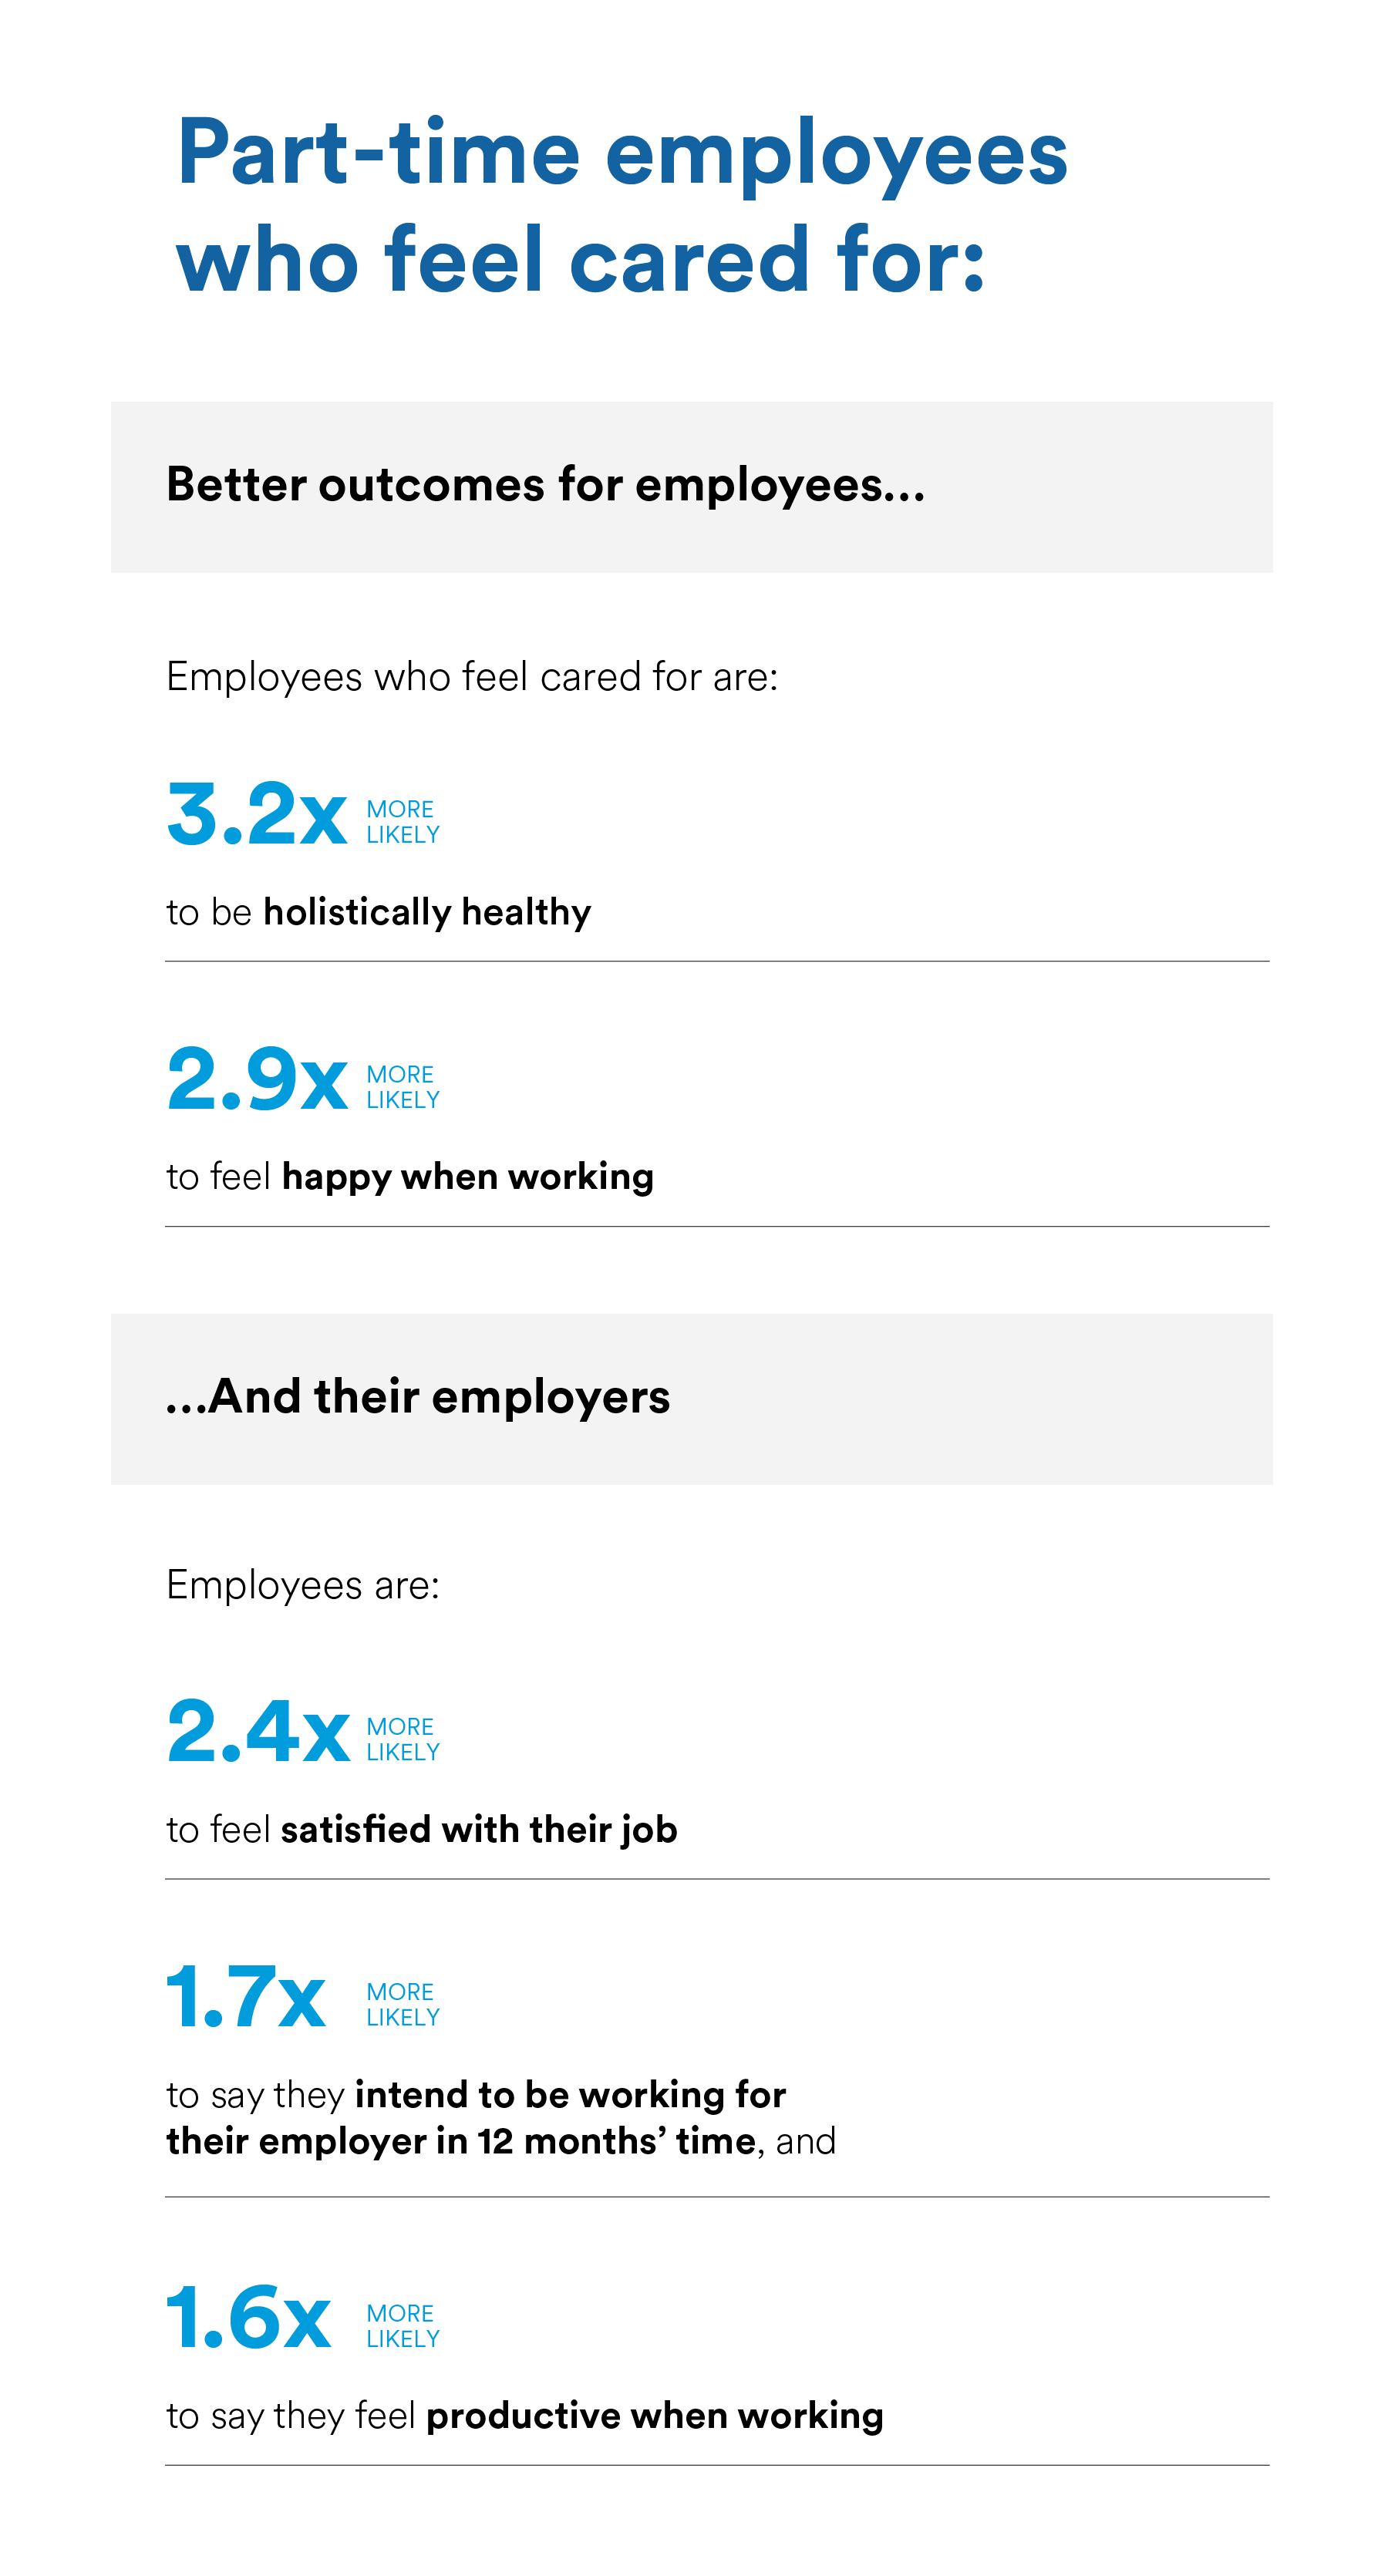 Part-time employees feel cared for